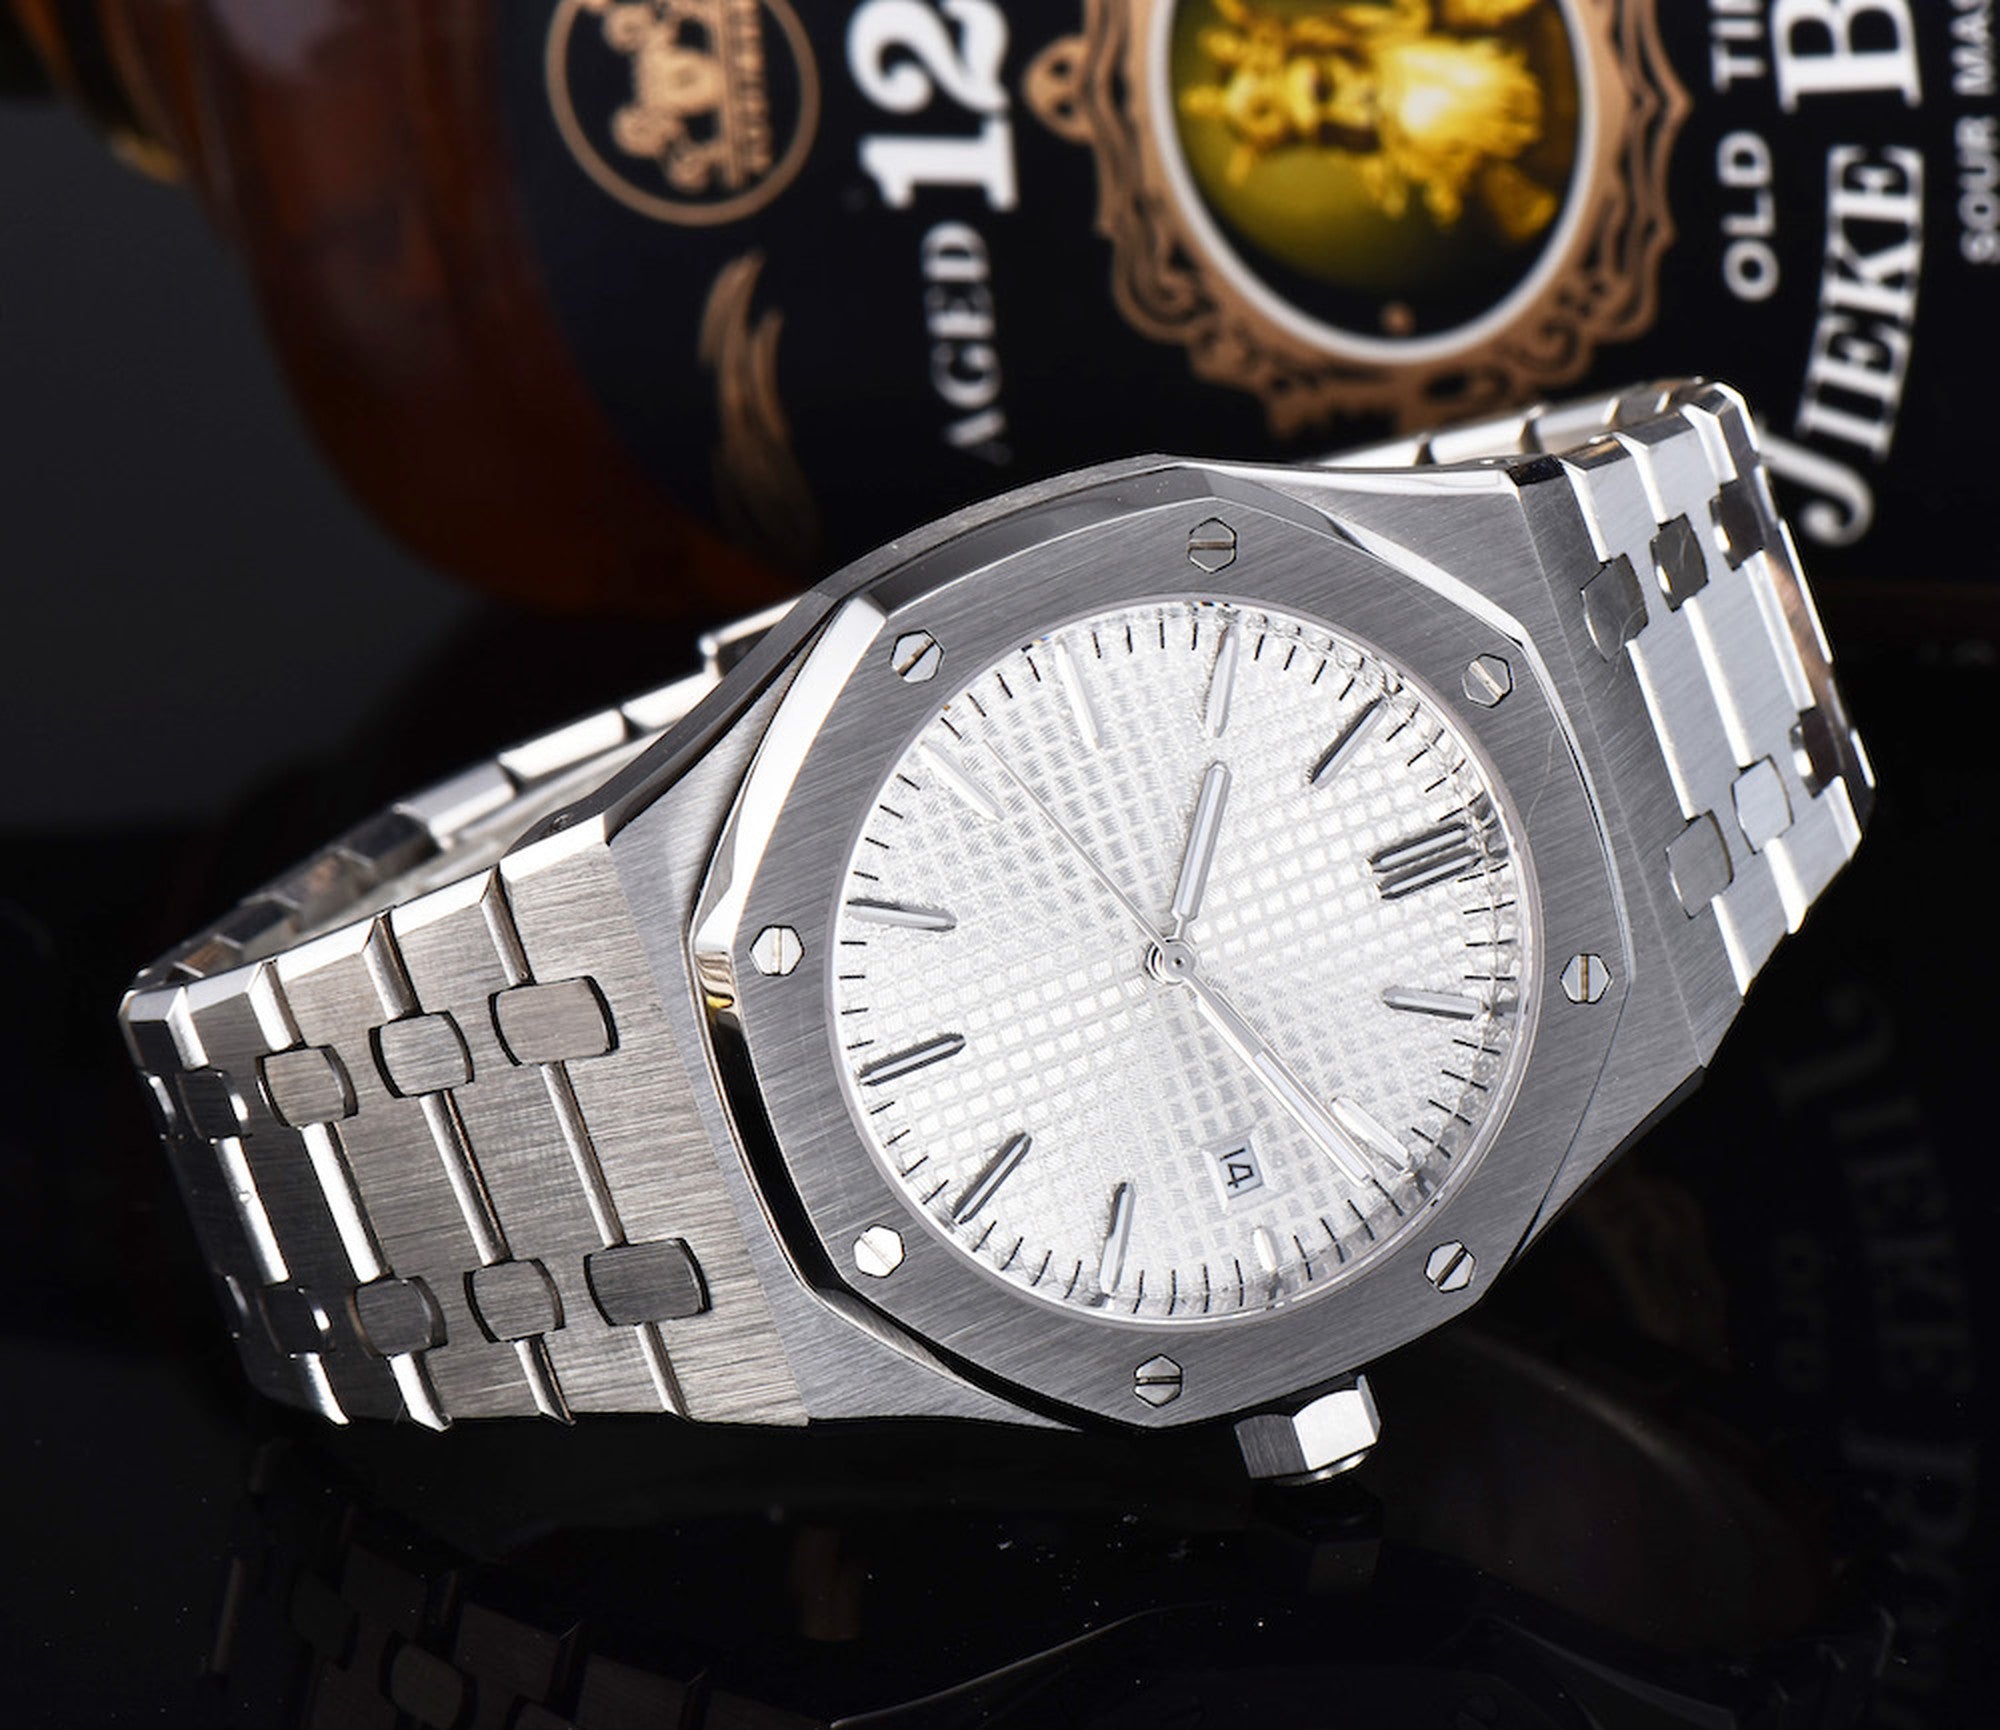 Mechanical Men's Automatic: Stainless Steel Watches Silver / White / Suits, Popular Luxury Brands / Fashion AP74